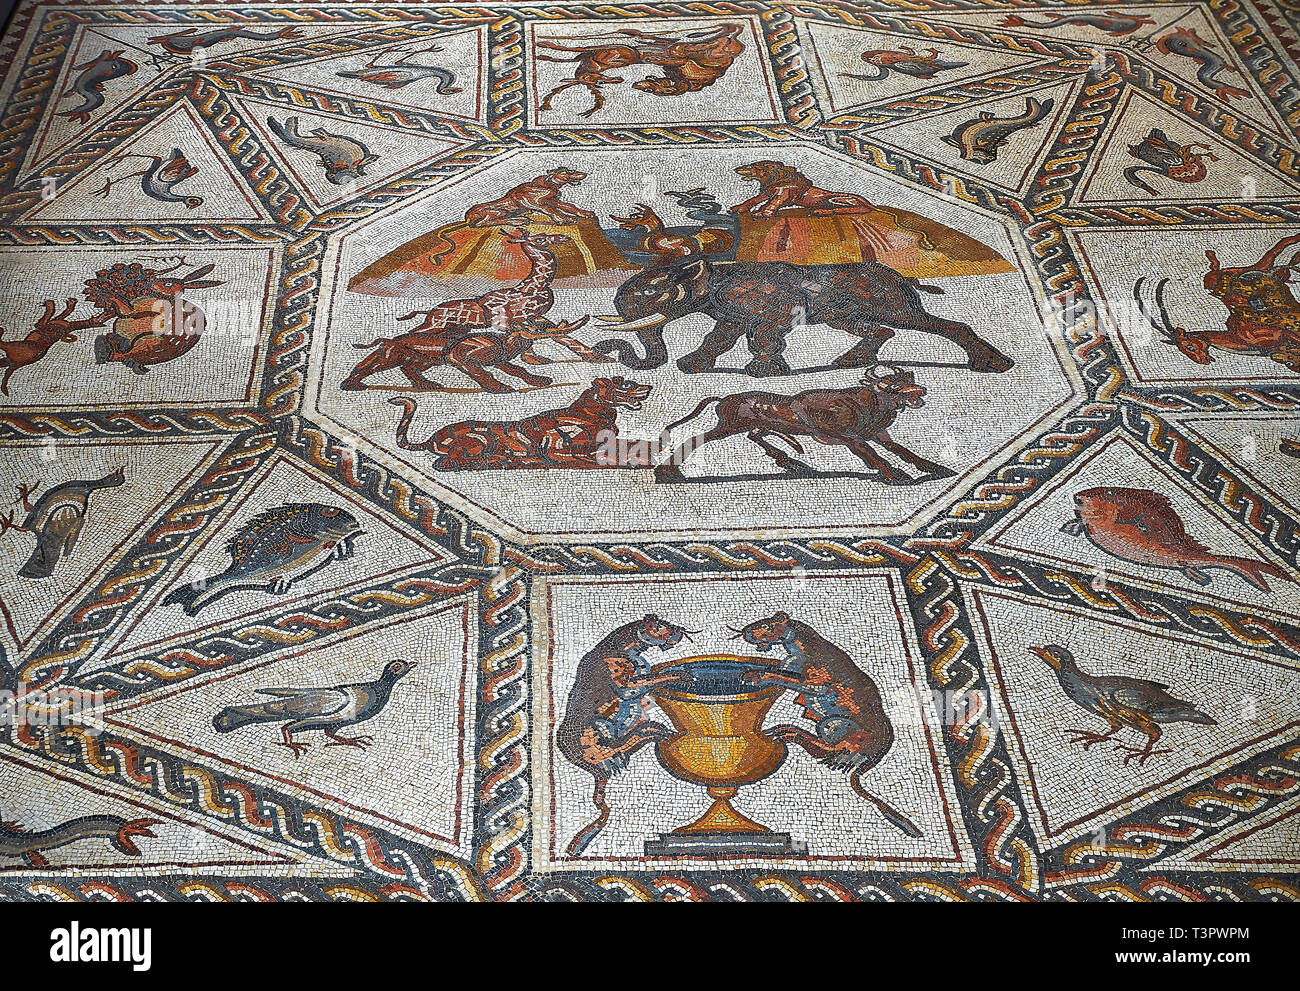 https://c8.alamy.com/comp/T3PWPM/african-animals-and-fish-from-the-3rd-century-roman-mosaic-villa-floor-from-lod-near-tel-aviv-israel-the-roman-floor-mosaic-of-lod-is-the-largest-a-T3PWPM.jpg